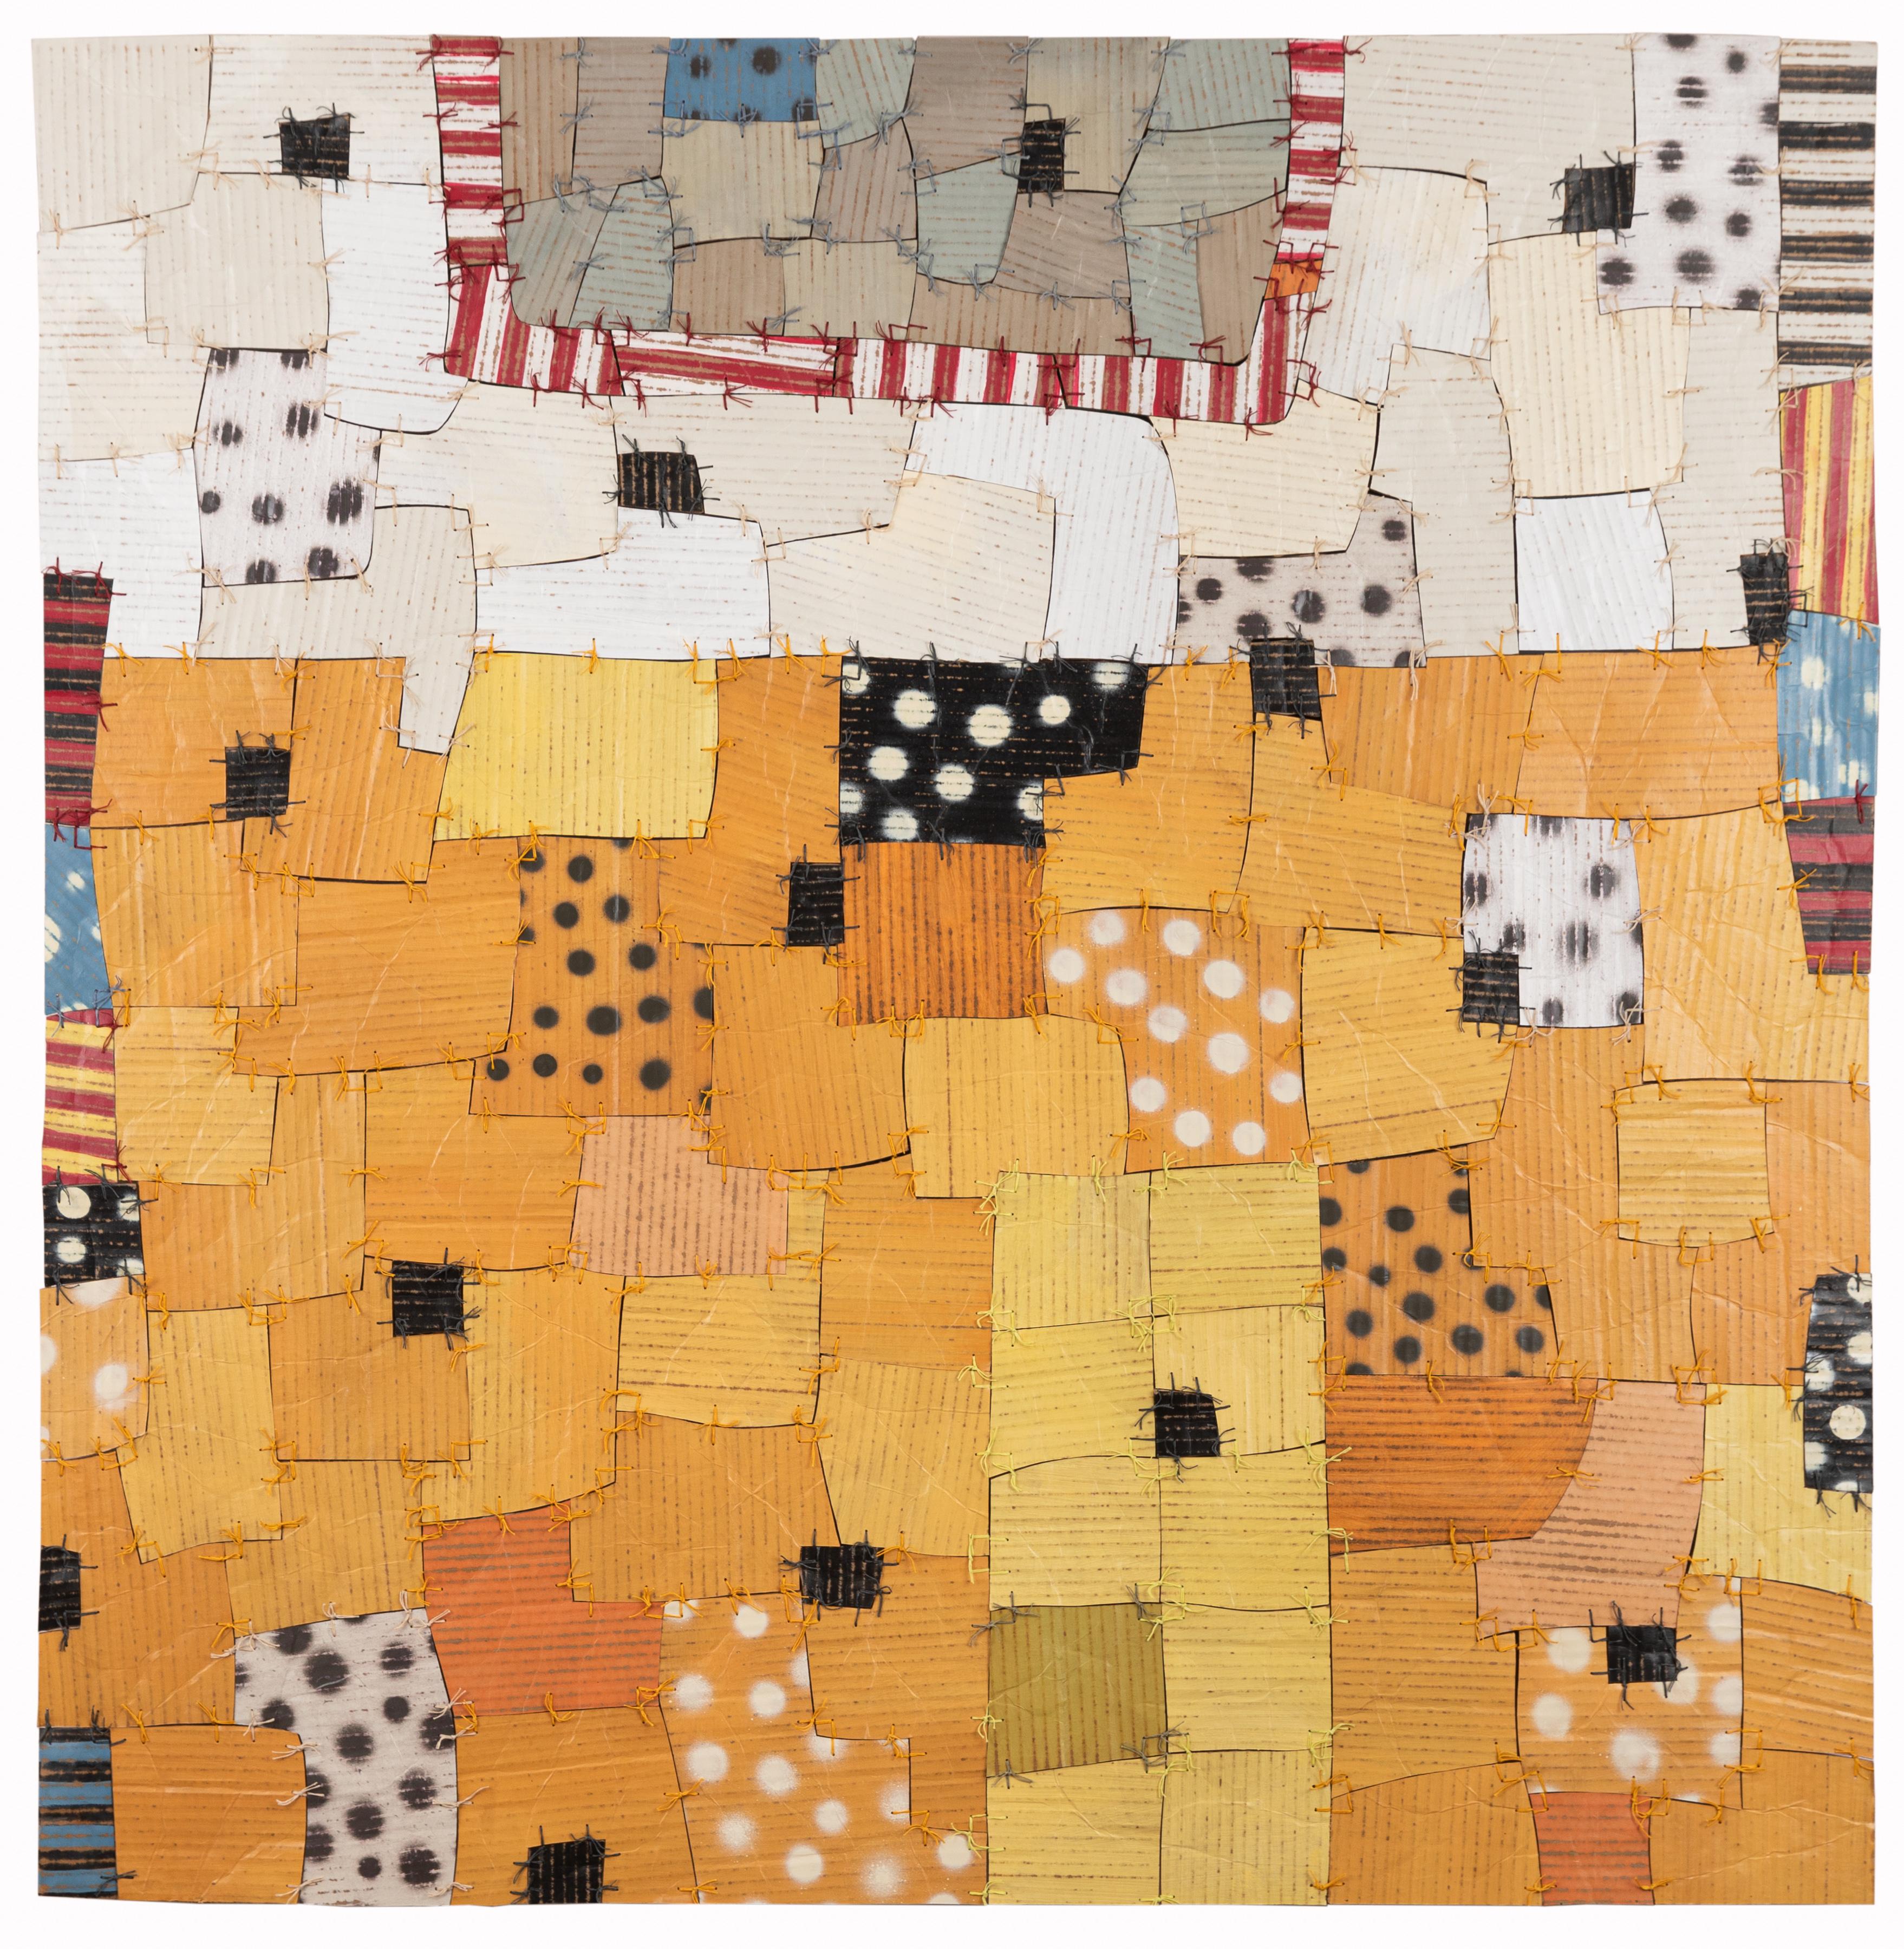 "Drenched in Enthusiasm" - a Contemporary, Eclectic, Hand-Sewn Cardboard Quilt